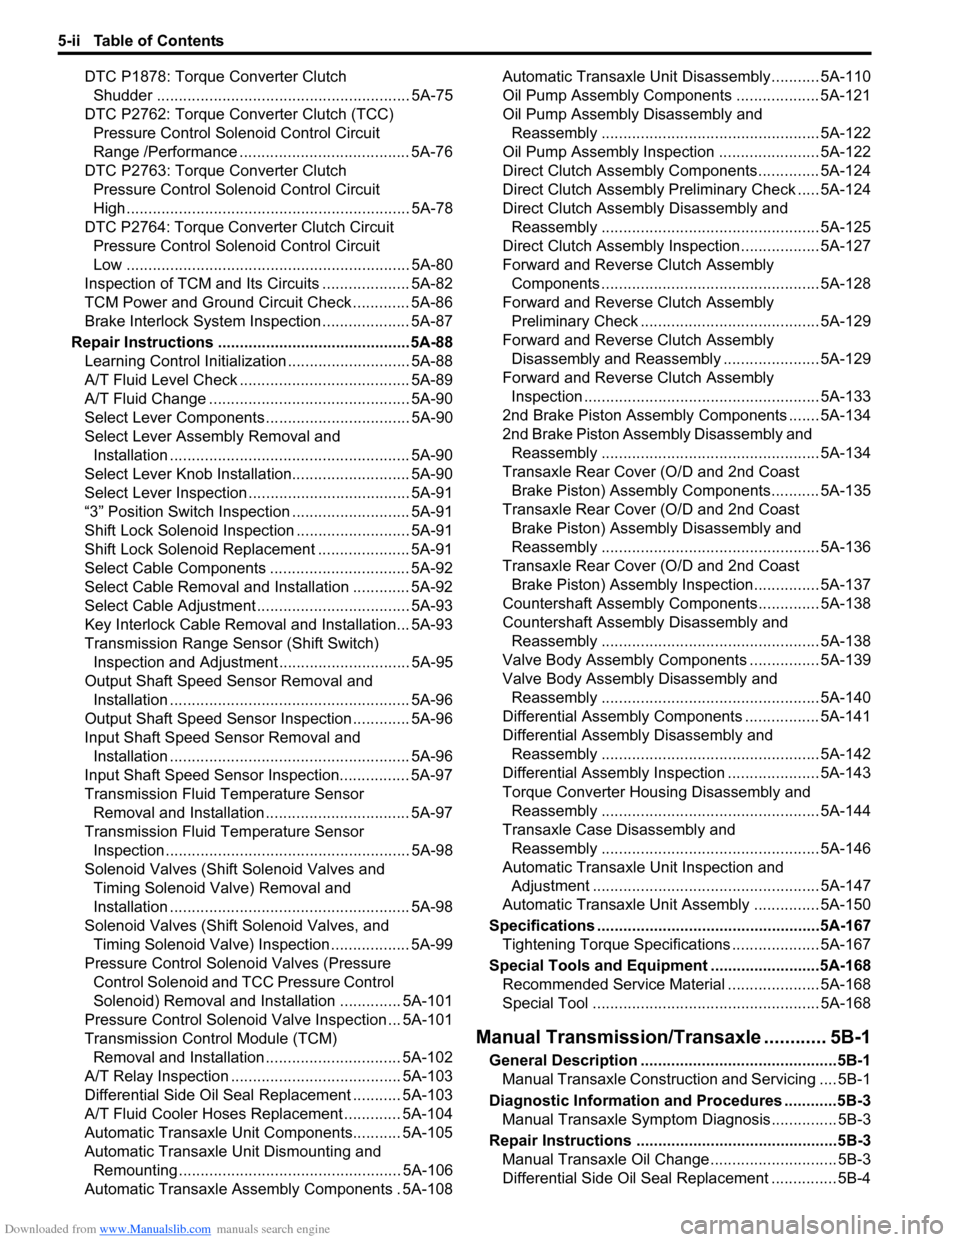 SUZUKI SWIFT 2006 2.G Service Service Manual Downloaded from www.Manualslib.com manuals search engine 5-ii Table of Contents
DTC P1878: Torque Converter Clutch Shudder .......................................................... 5A-75
DTC P2762: T